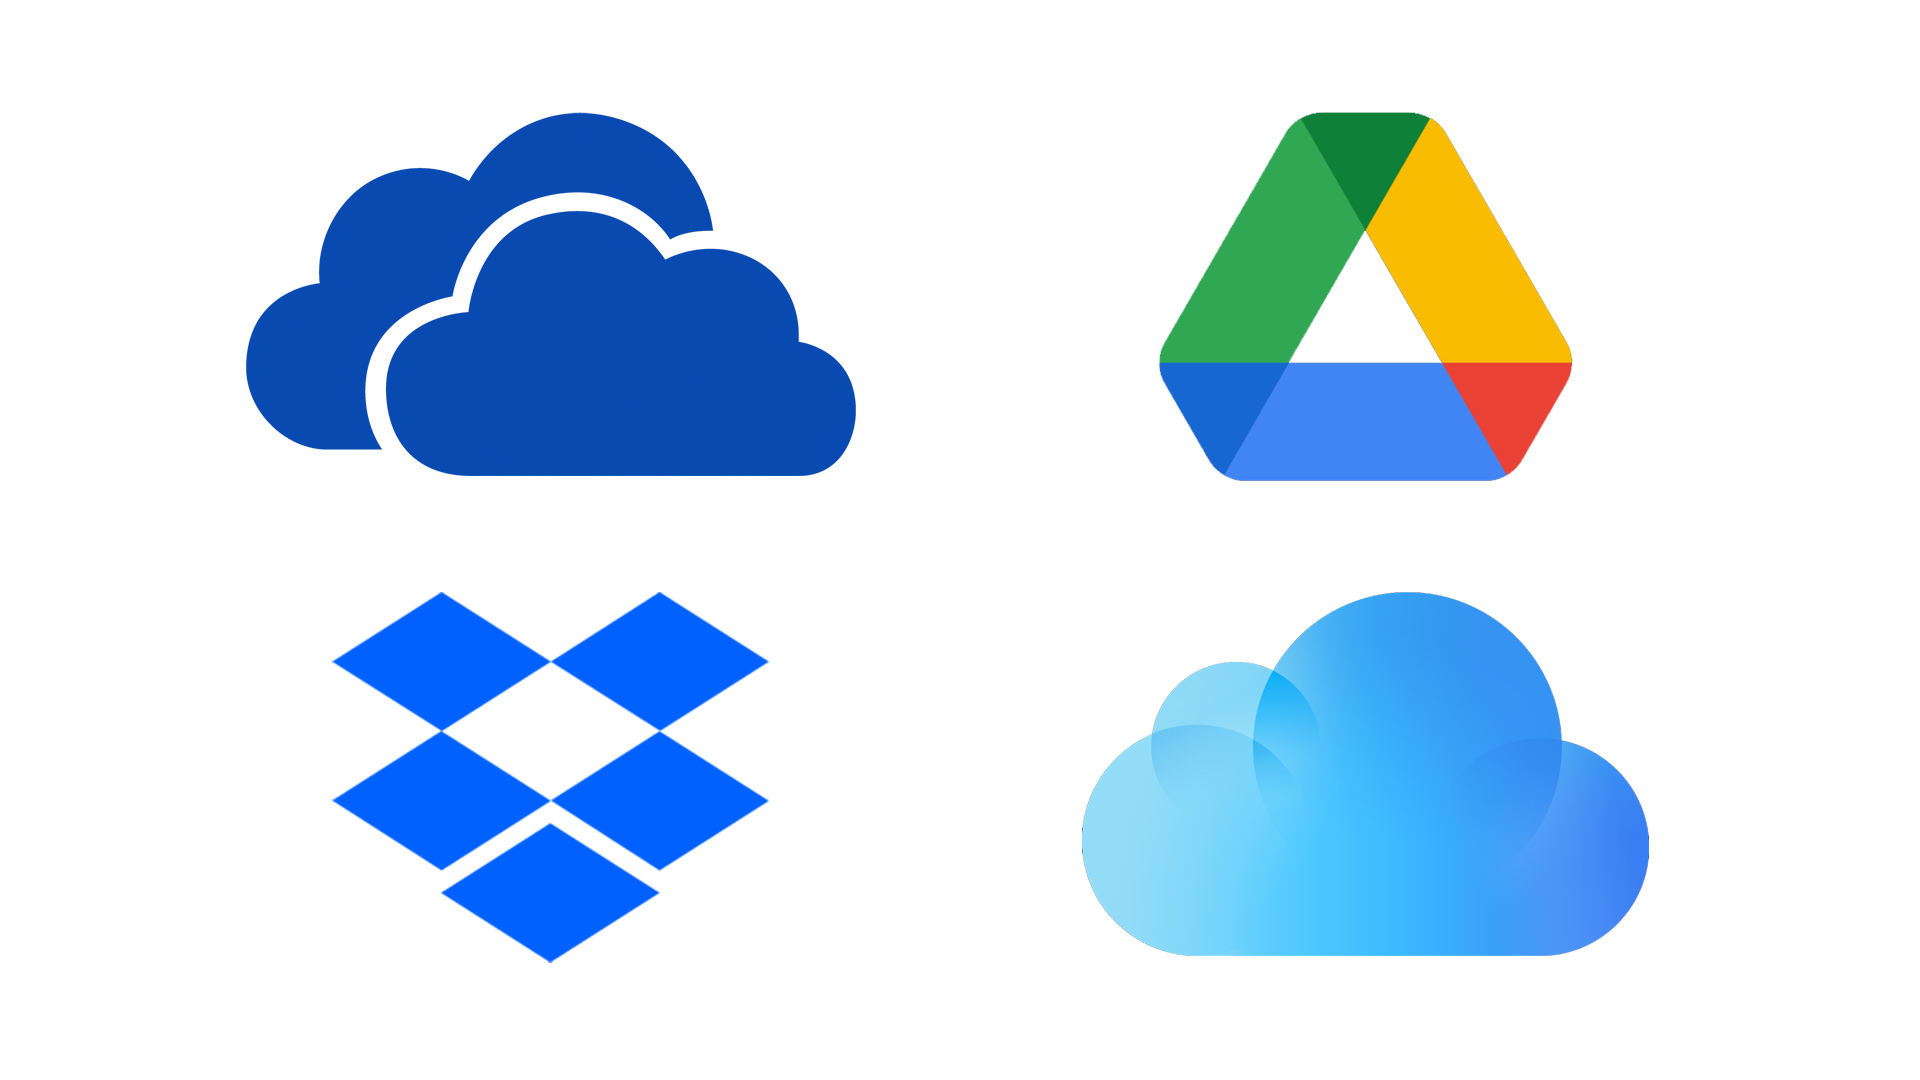 How to use Google Drive, Dropbox, etc., in Files app on iPhone and iPad